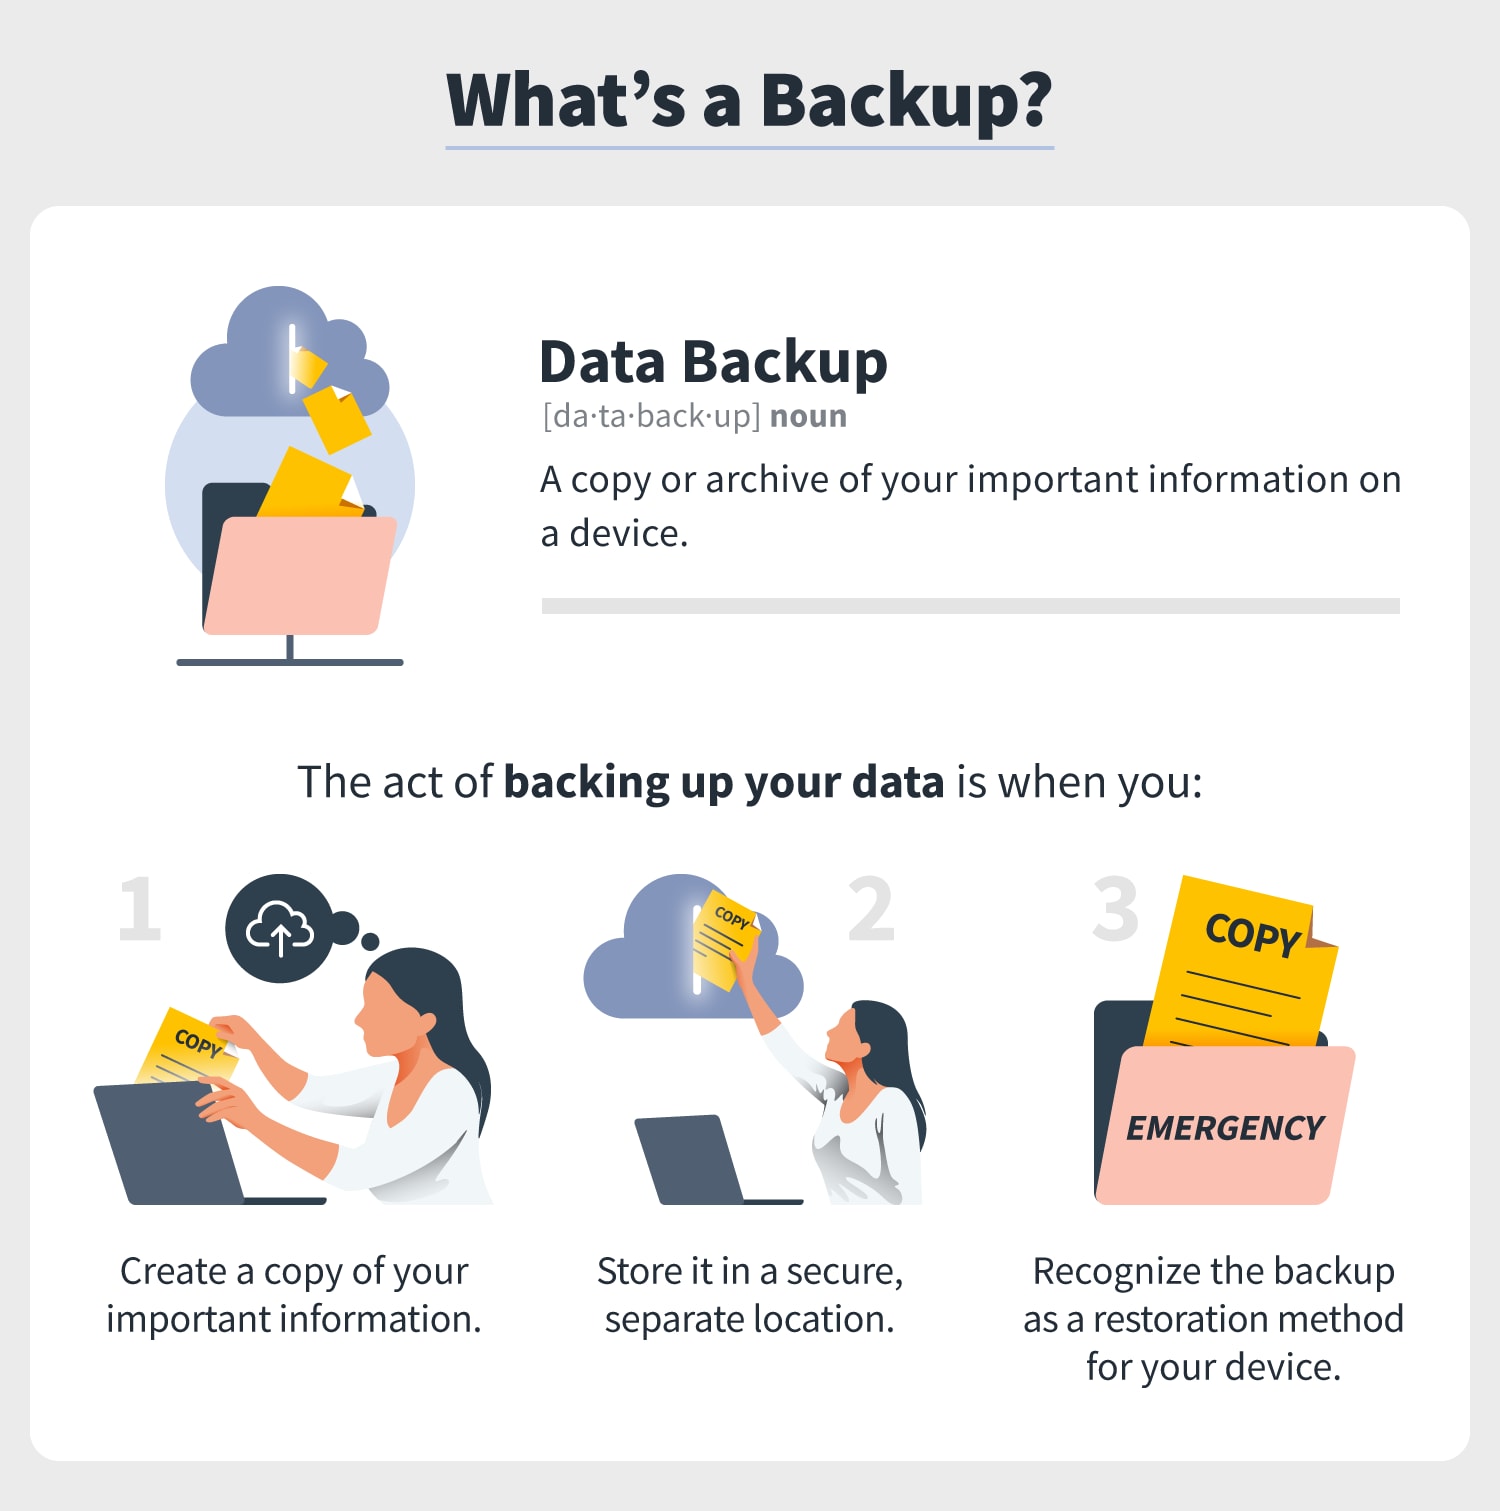 Regularly backup your important data: Create backups of your important files and data to an external storage device or cloud storage service to minimize the impact of potential malware infections or data loss.
Enable pop-up blockers: Configure your web browser to block pop-up windows, as they can often contain malicious content or lead to potentially harmful websites.